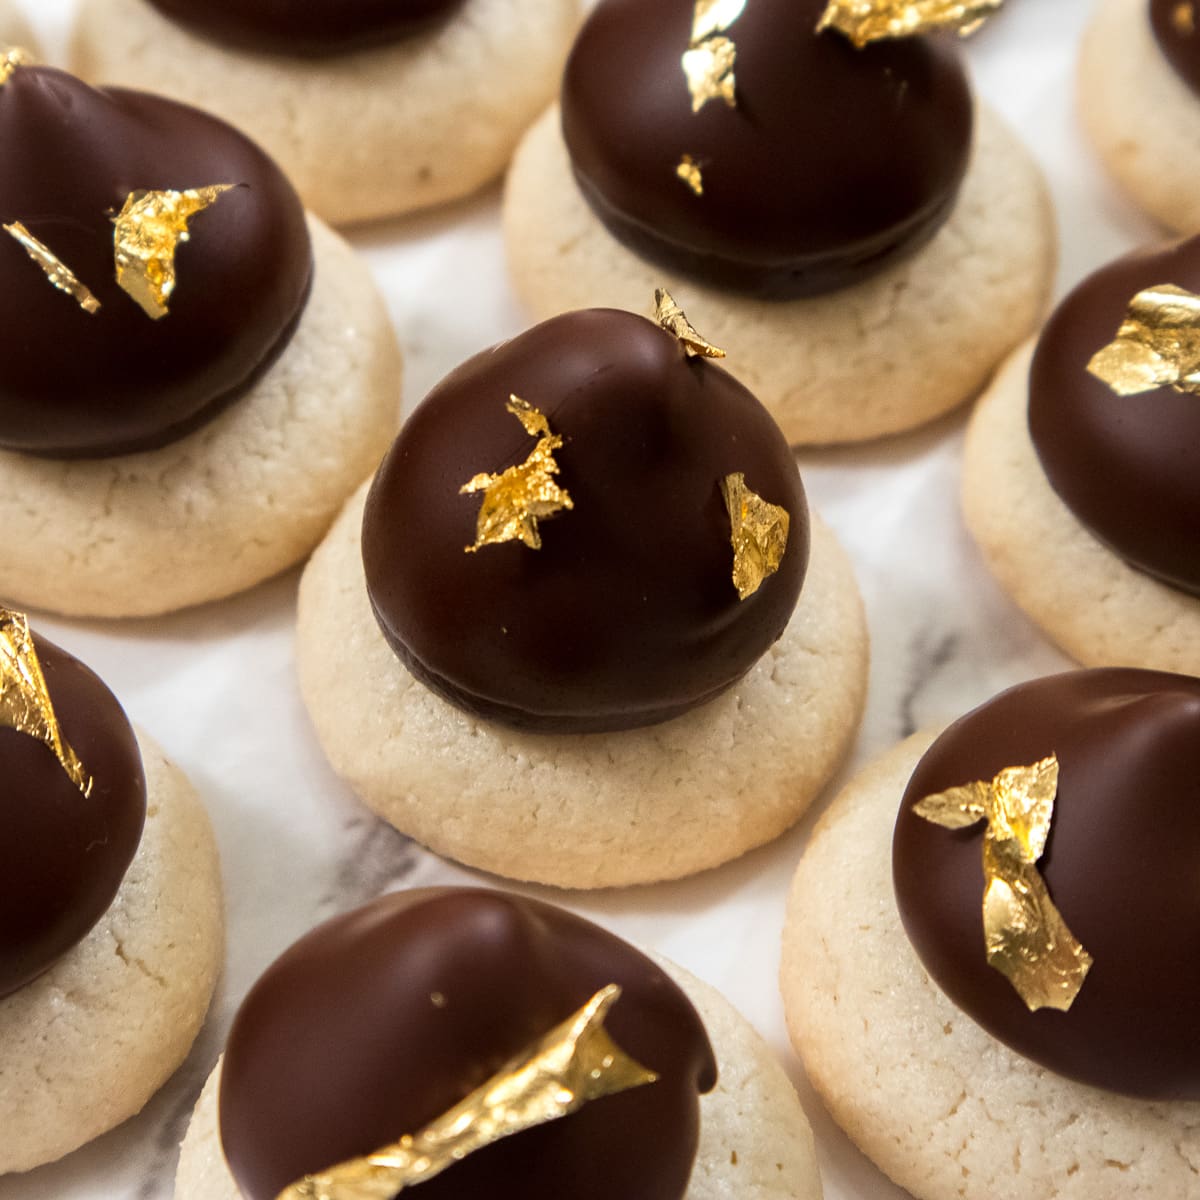 Sarah Bernhardt cookies feature a macaron base with a chocolate ganache filling,dipped in chocolate and finished with gold leaf